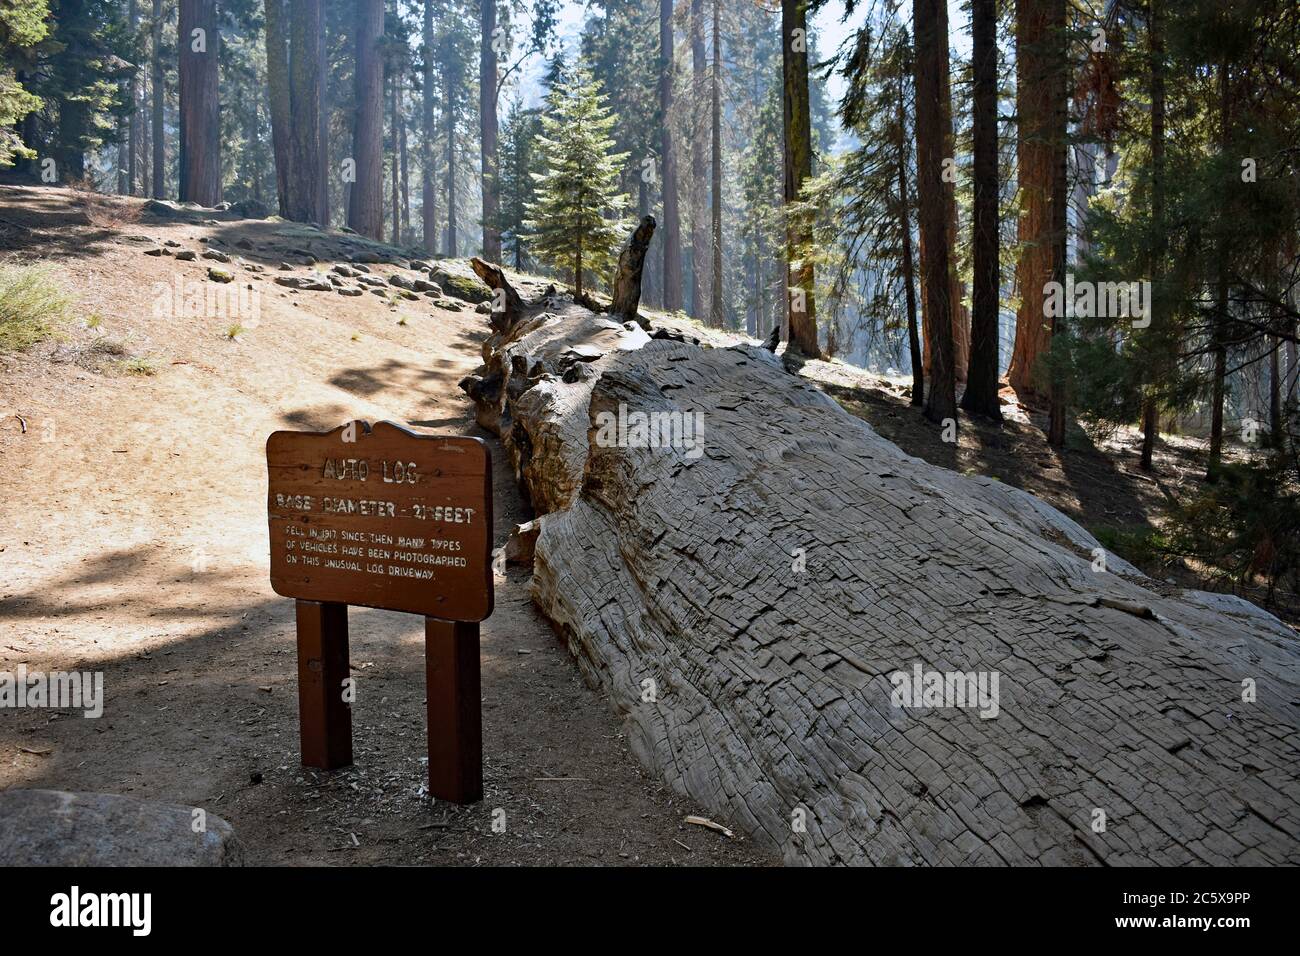 The Auto Log, A fallen sequoia tree (Sequoiadendron giganteum) driven on by cars in the past.  An interpretive sign next to the fallen tree. Stock Photo